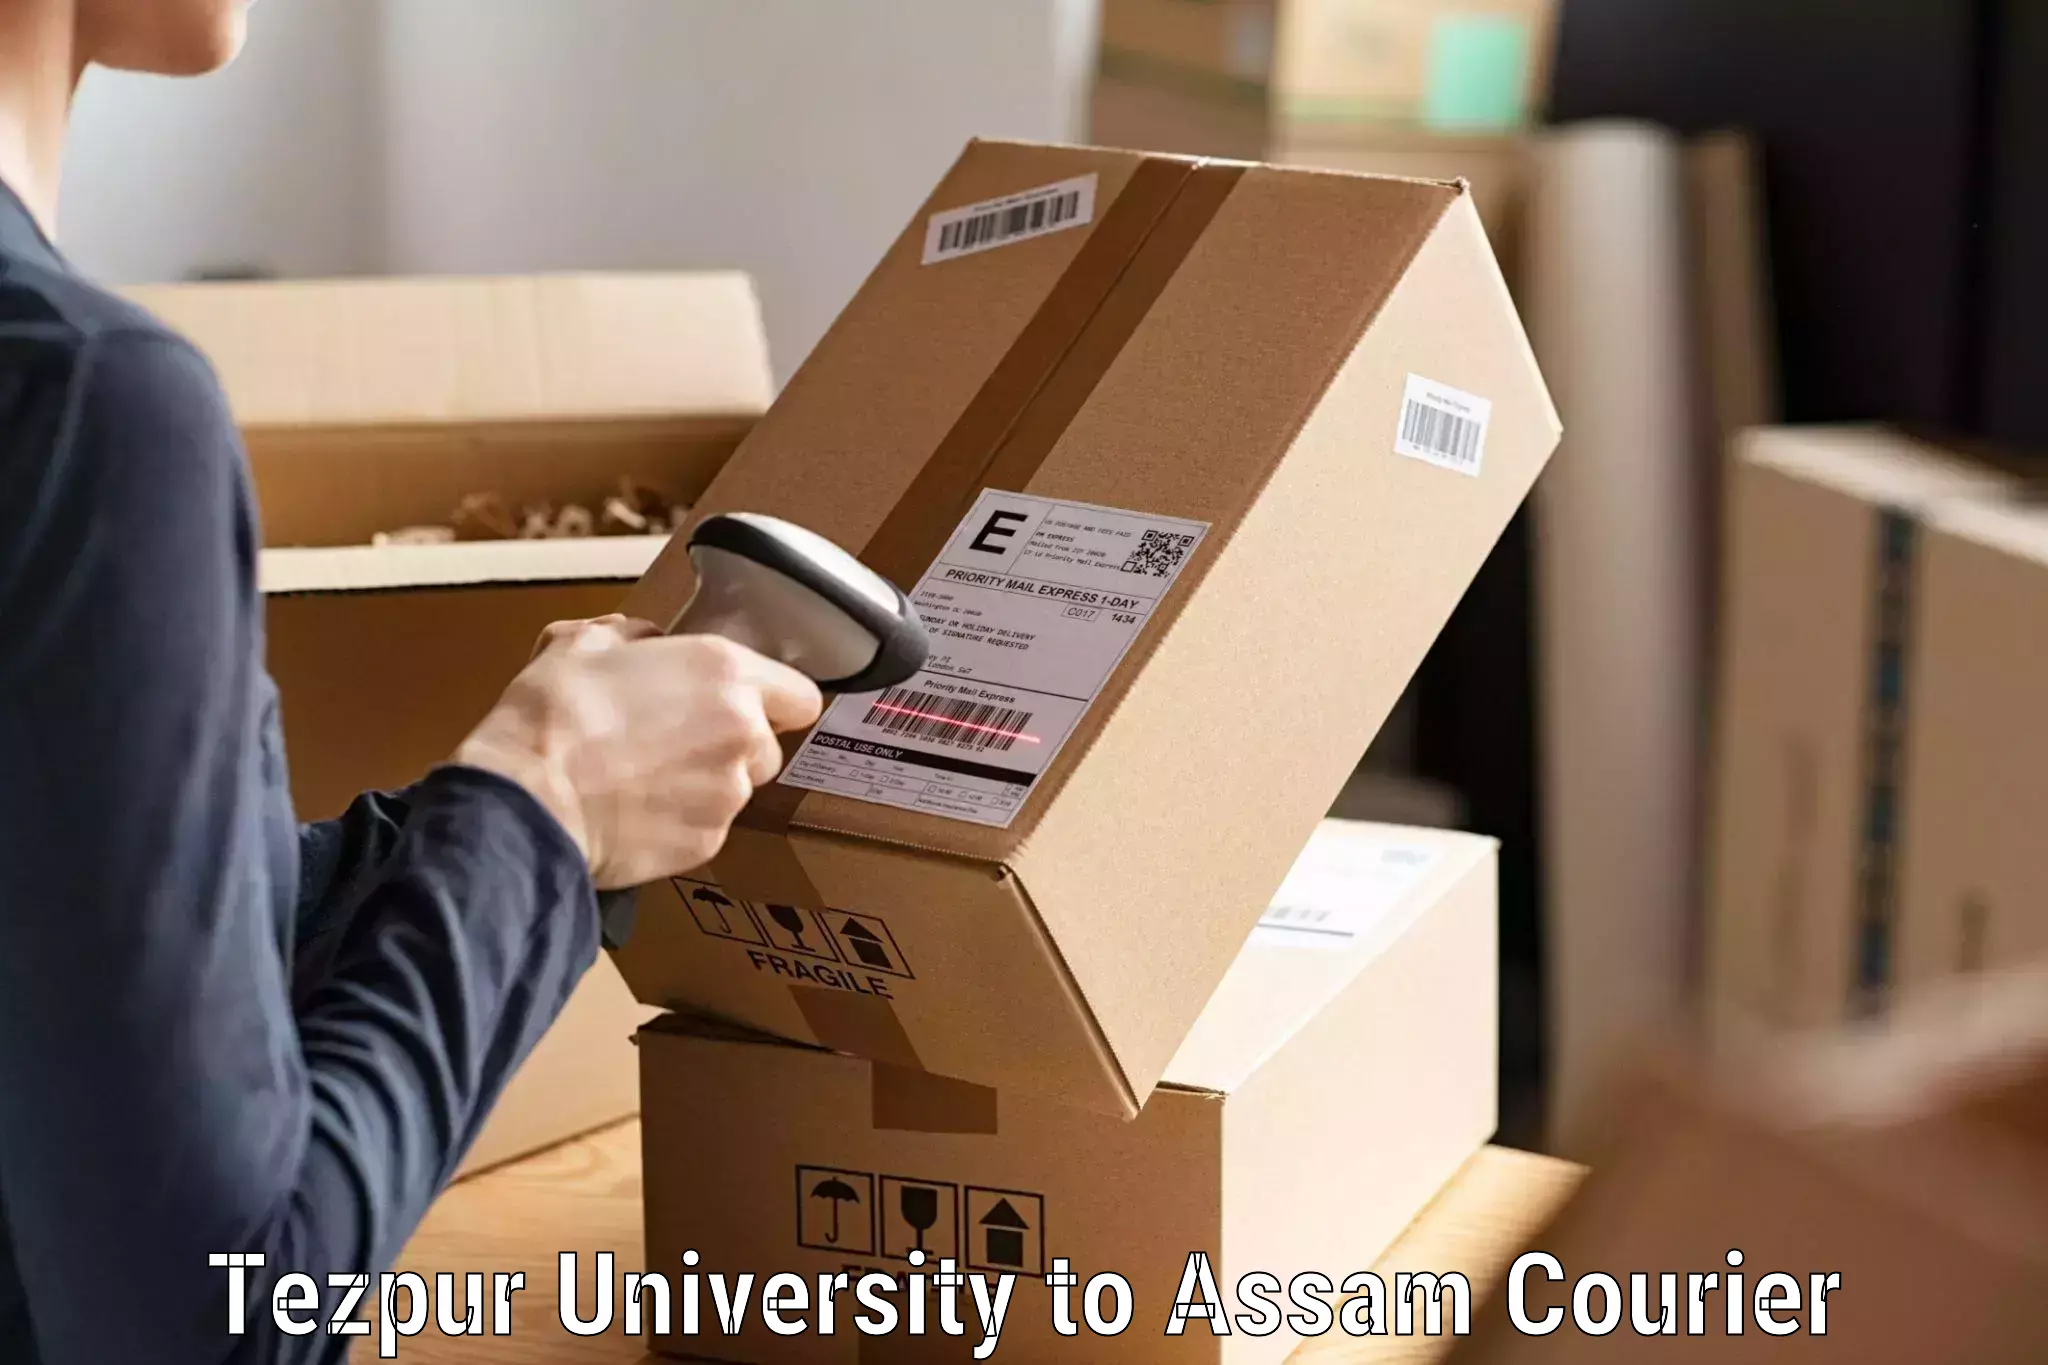 24/7 courier service Tezpur University to Chhaygaon